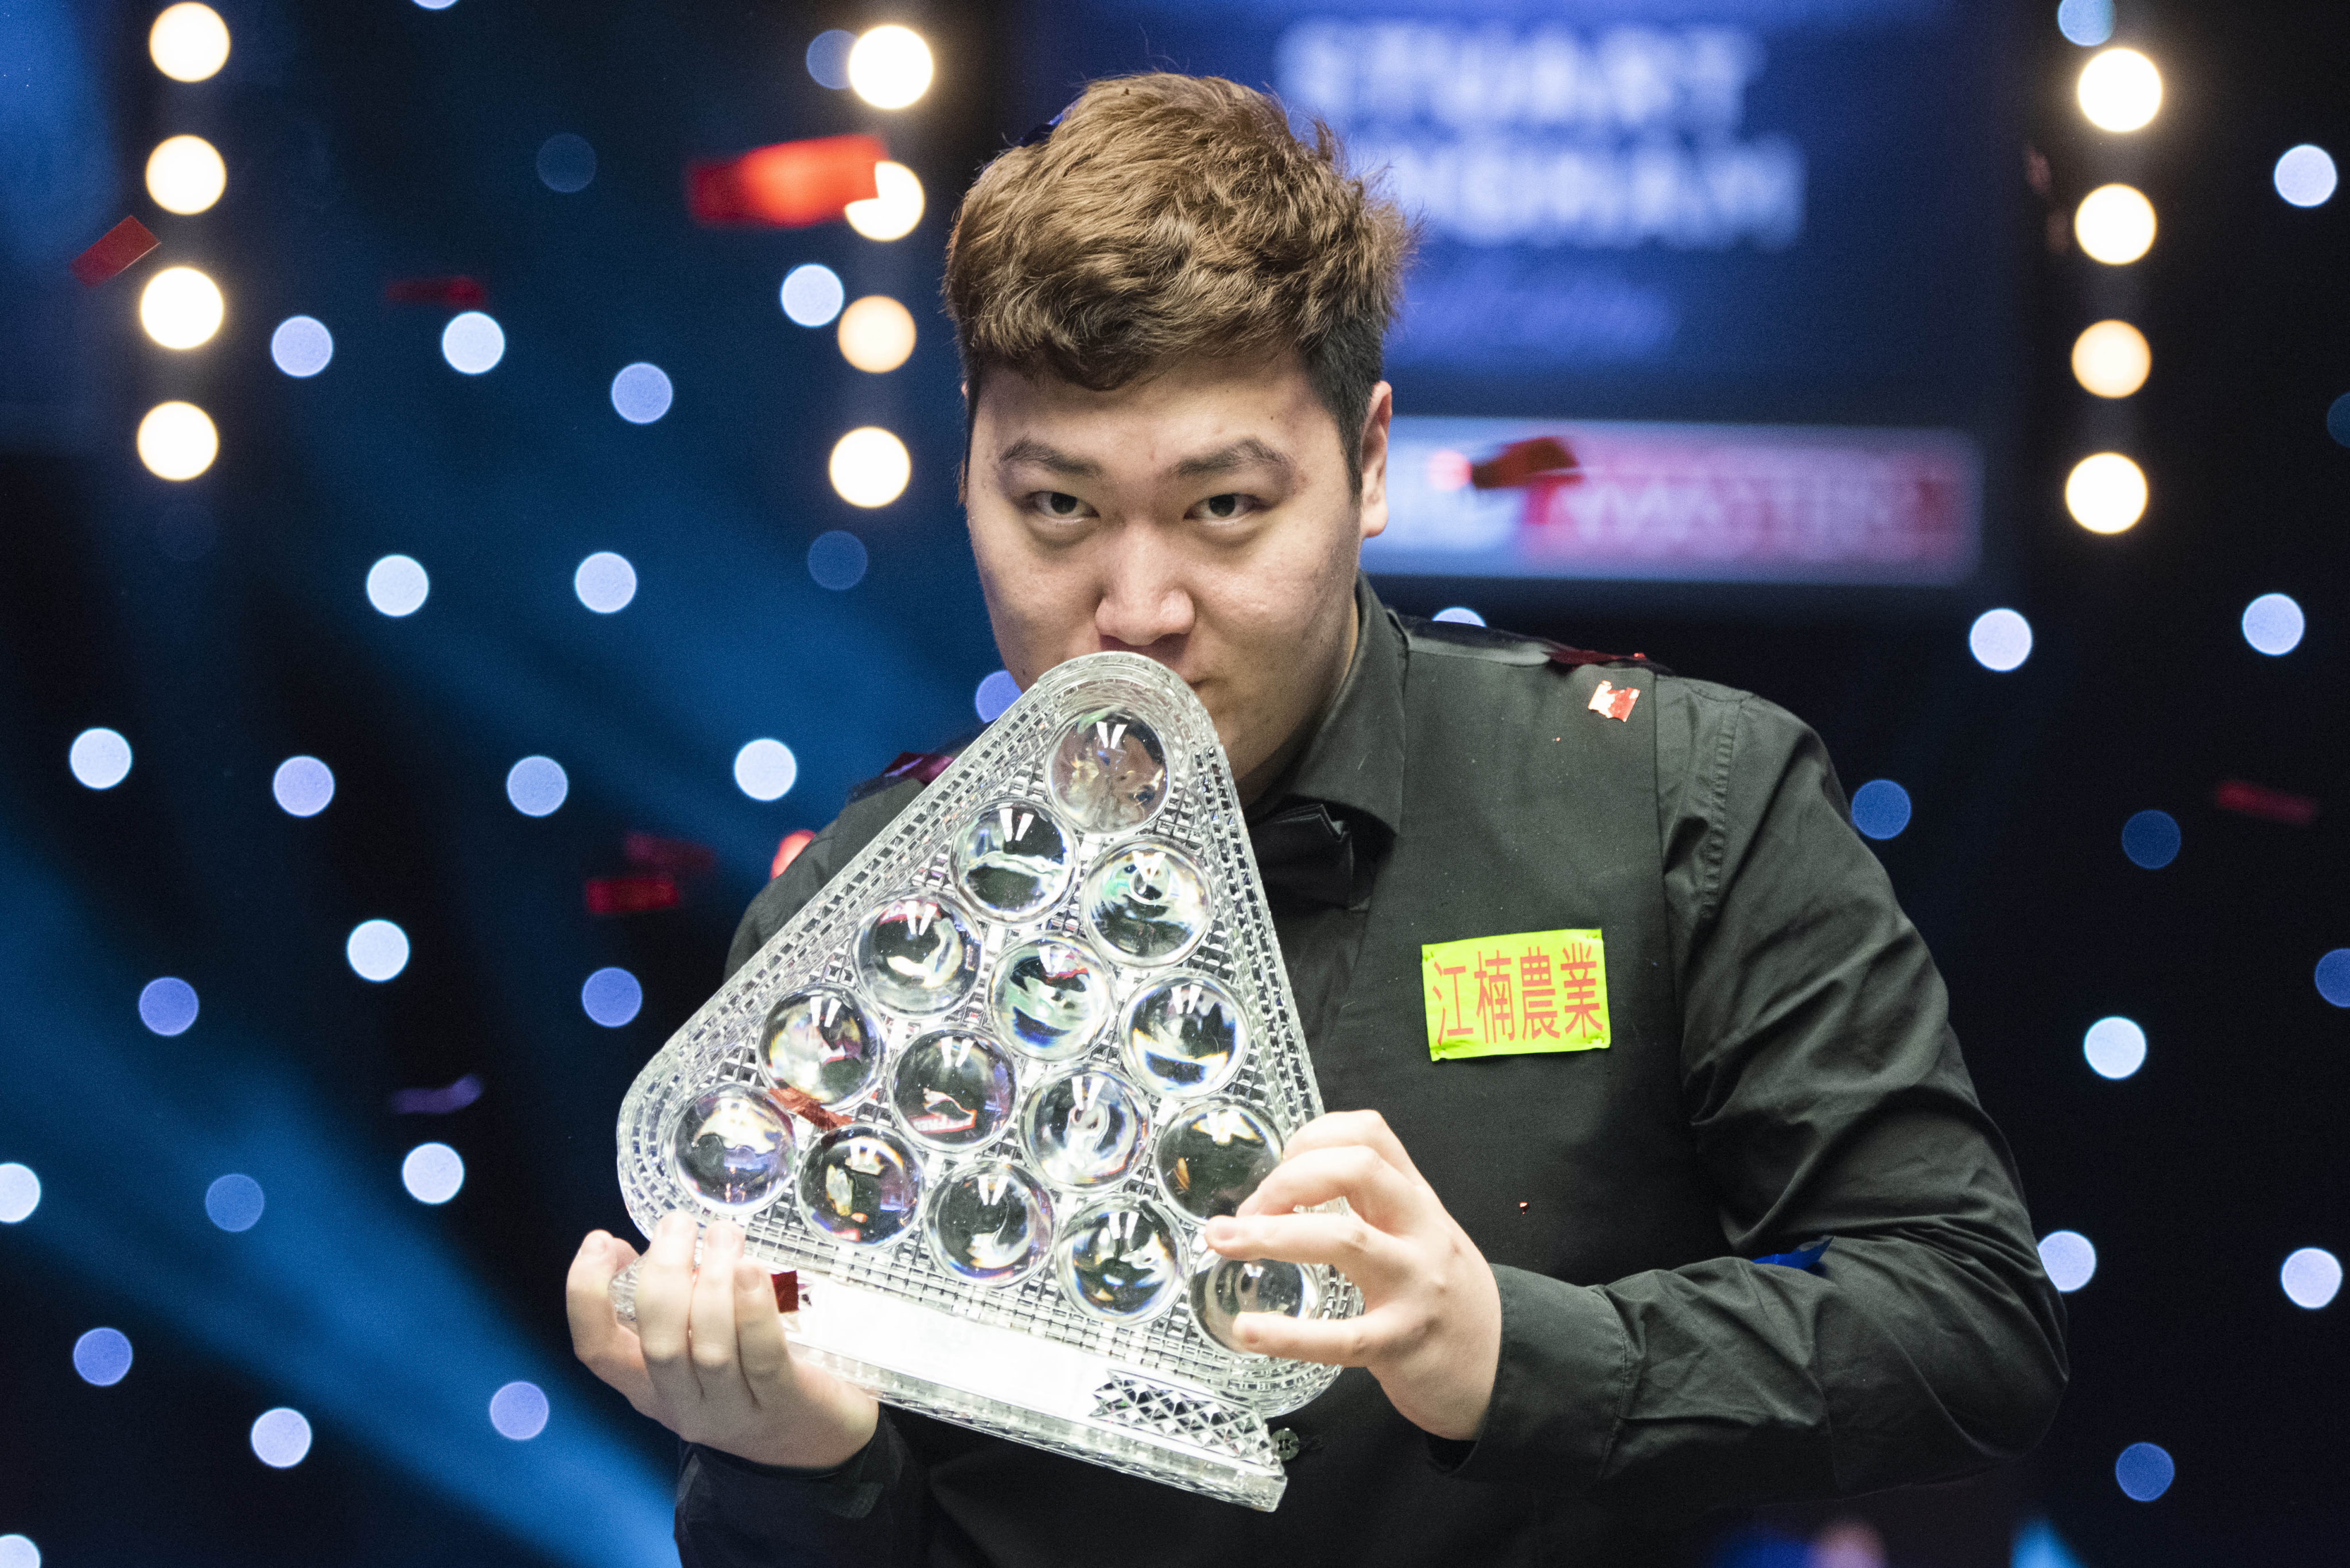 Yan Bingtao had won the Masters in 2021 before he was investigated for match-fixing. Photo: Xinhua